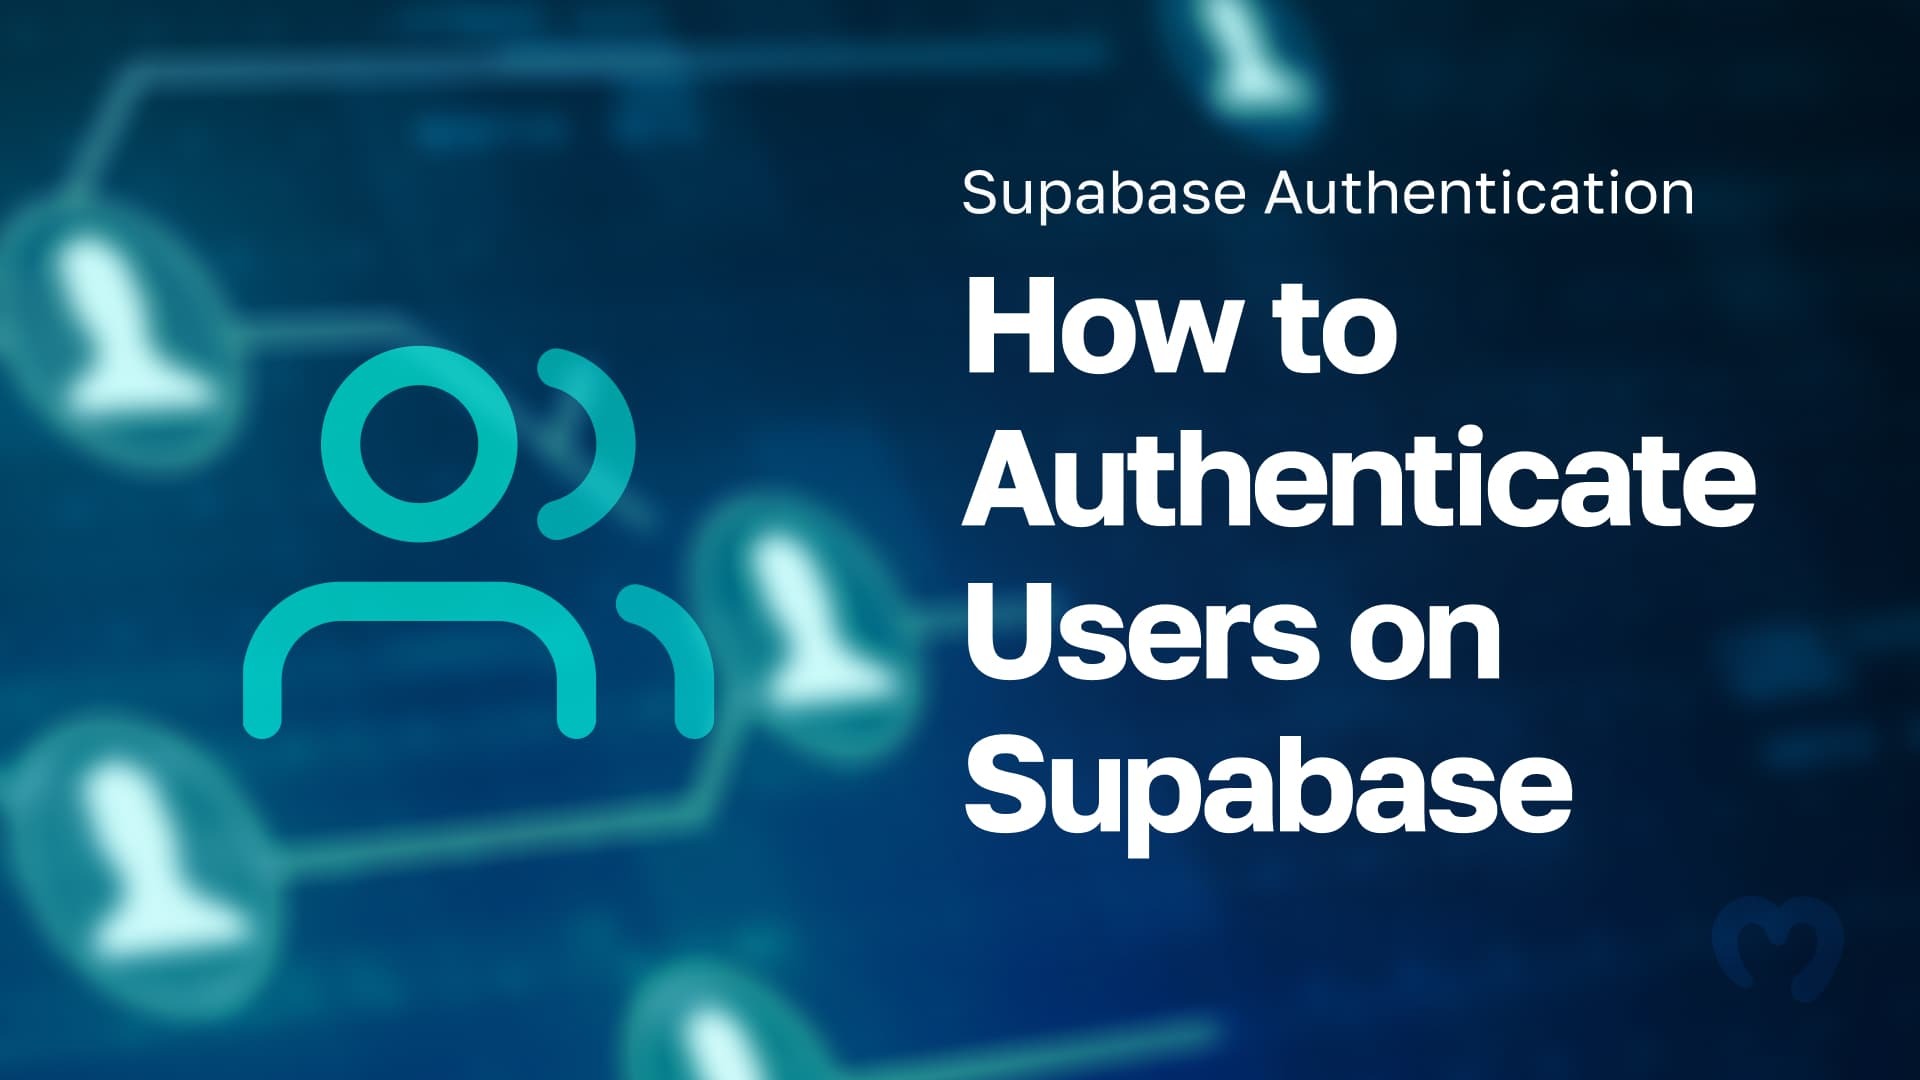 Supabase Authentication - How to Authenticate Users on Supabase